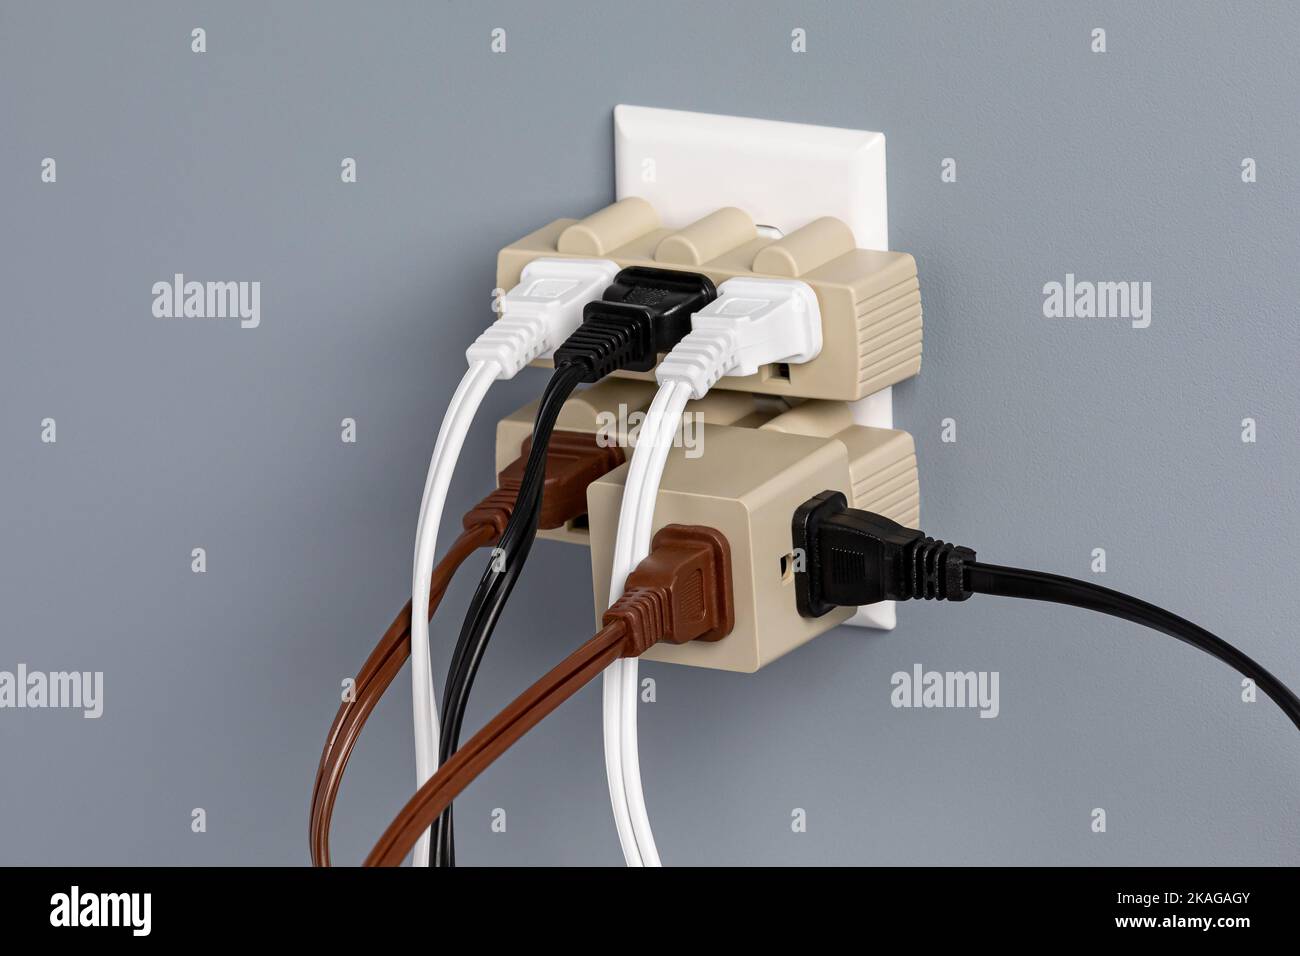 Electrical outlet overloaded with extension cords and adapters. Electricity safety, fire hazard and circuit overload concept Stock Photo